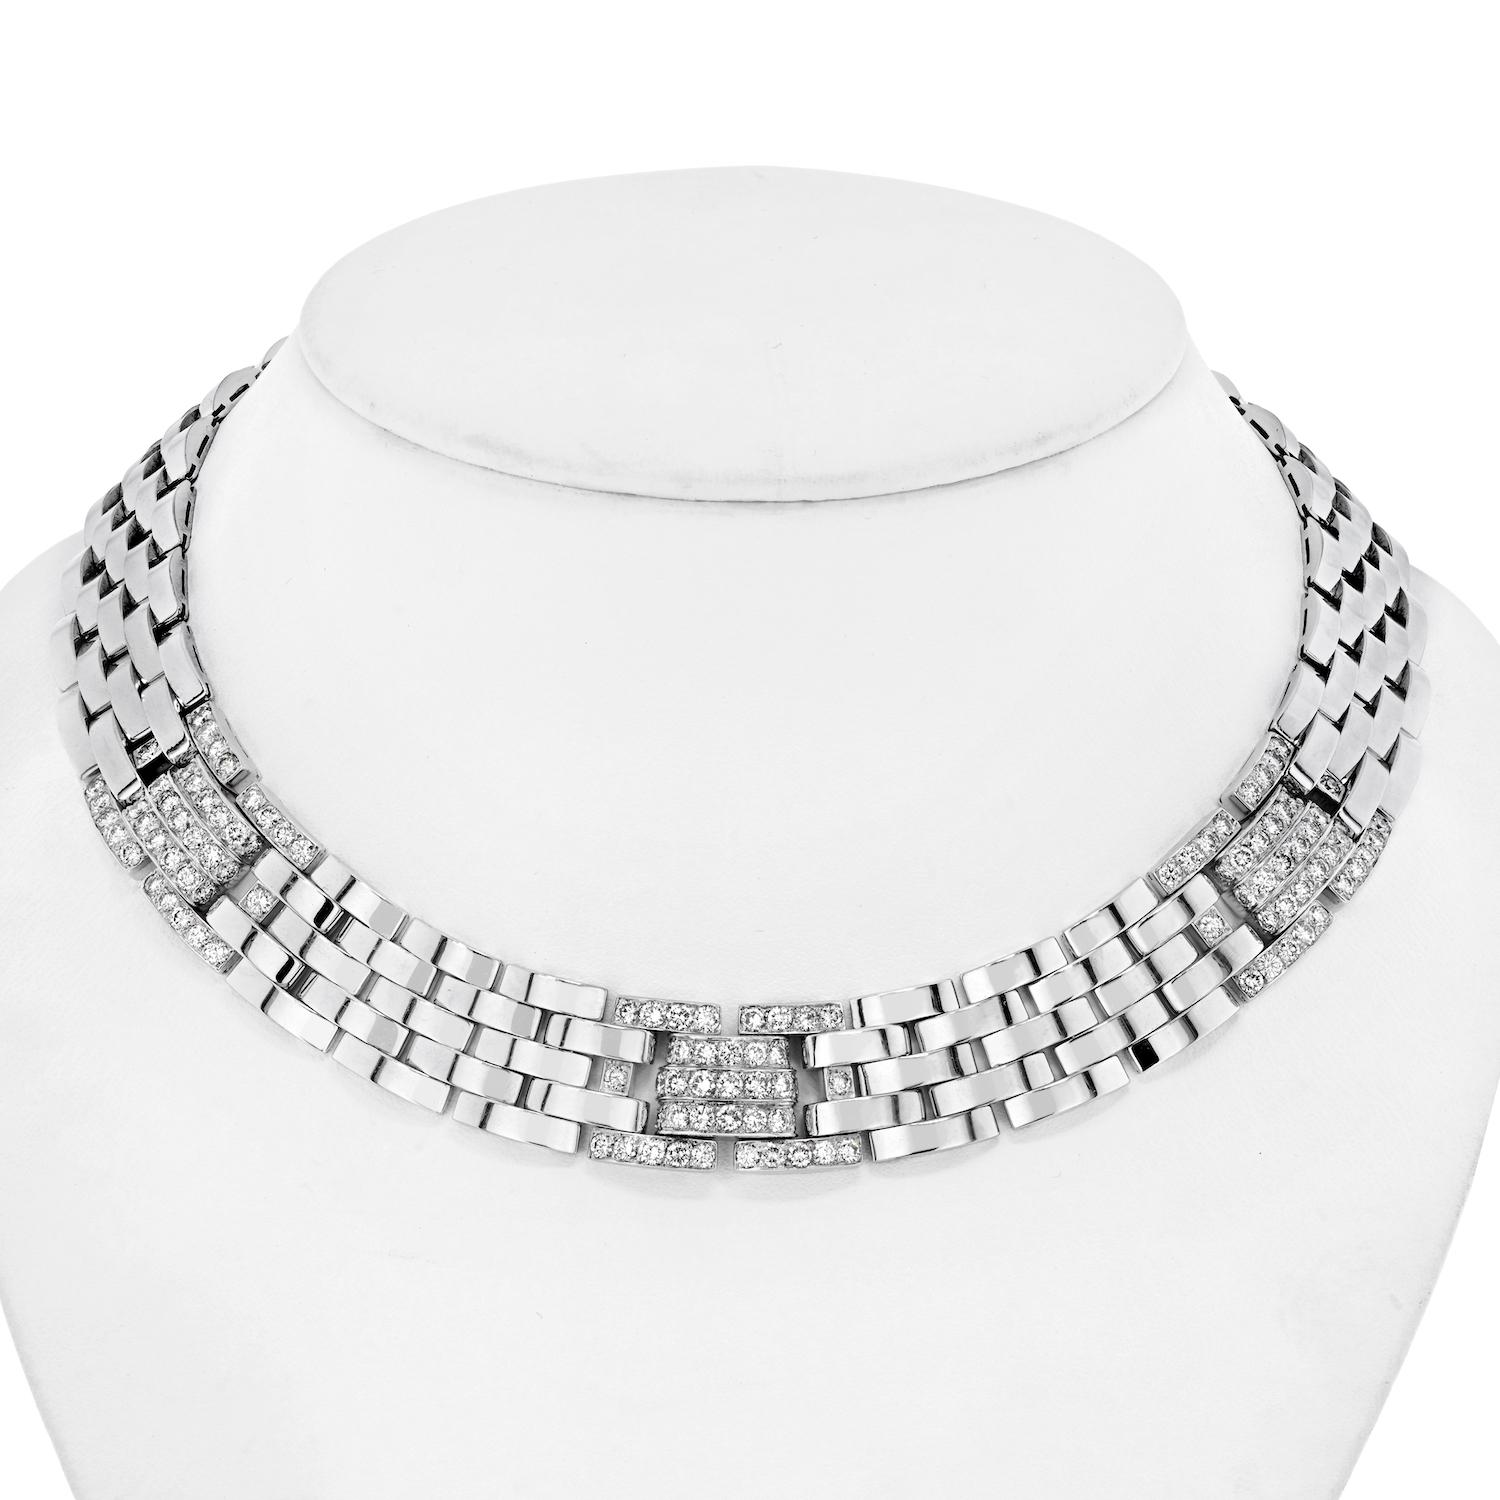 Diamond and Gold ‘Maillon Panthère’ Necklace, Cartier.

This dramatic Cartier collar necklace is all glamour, with diamond and white gold links. We’d love to see this with a strapless gown as well as with an open-collar silk shirt or jumpsuit for a